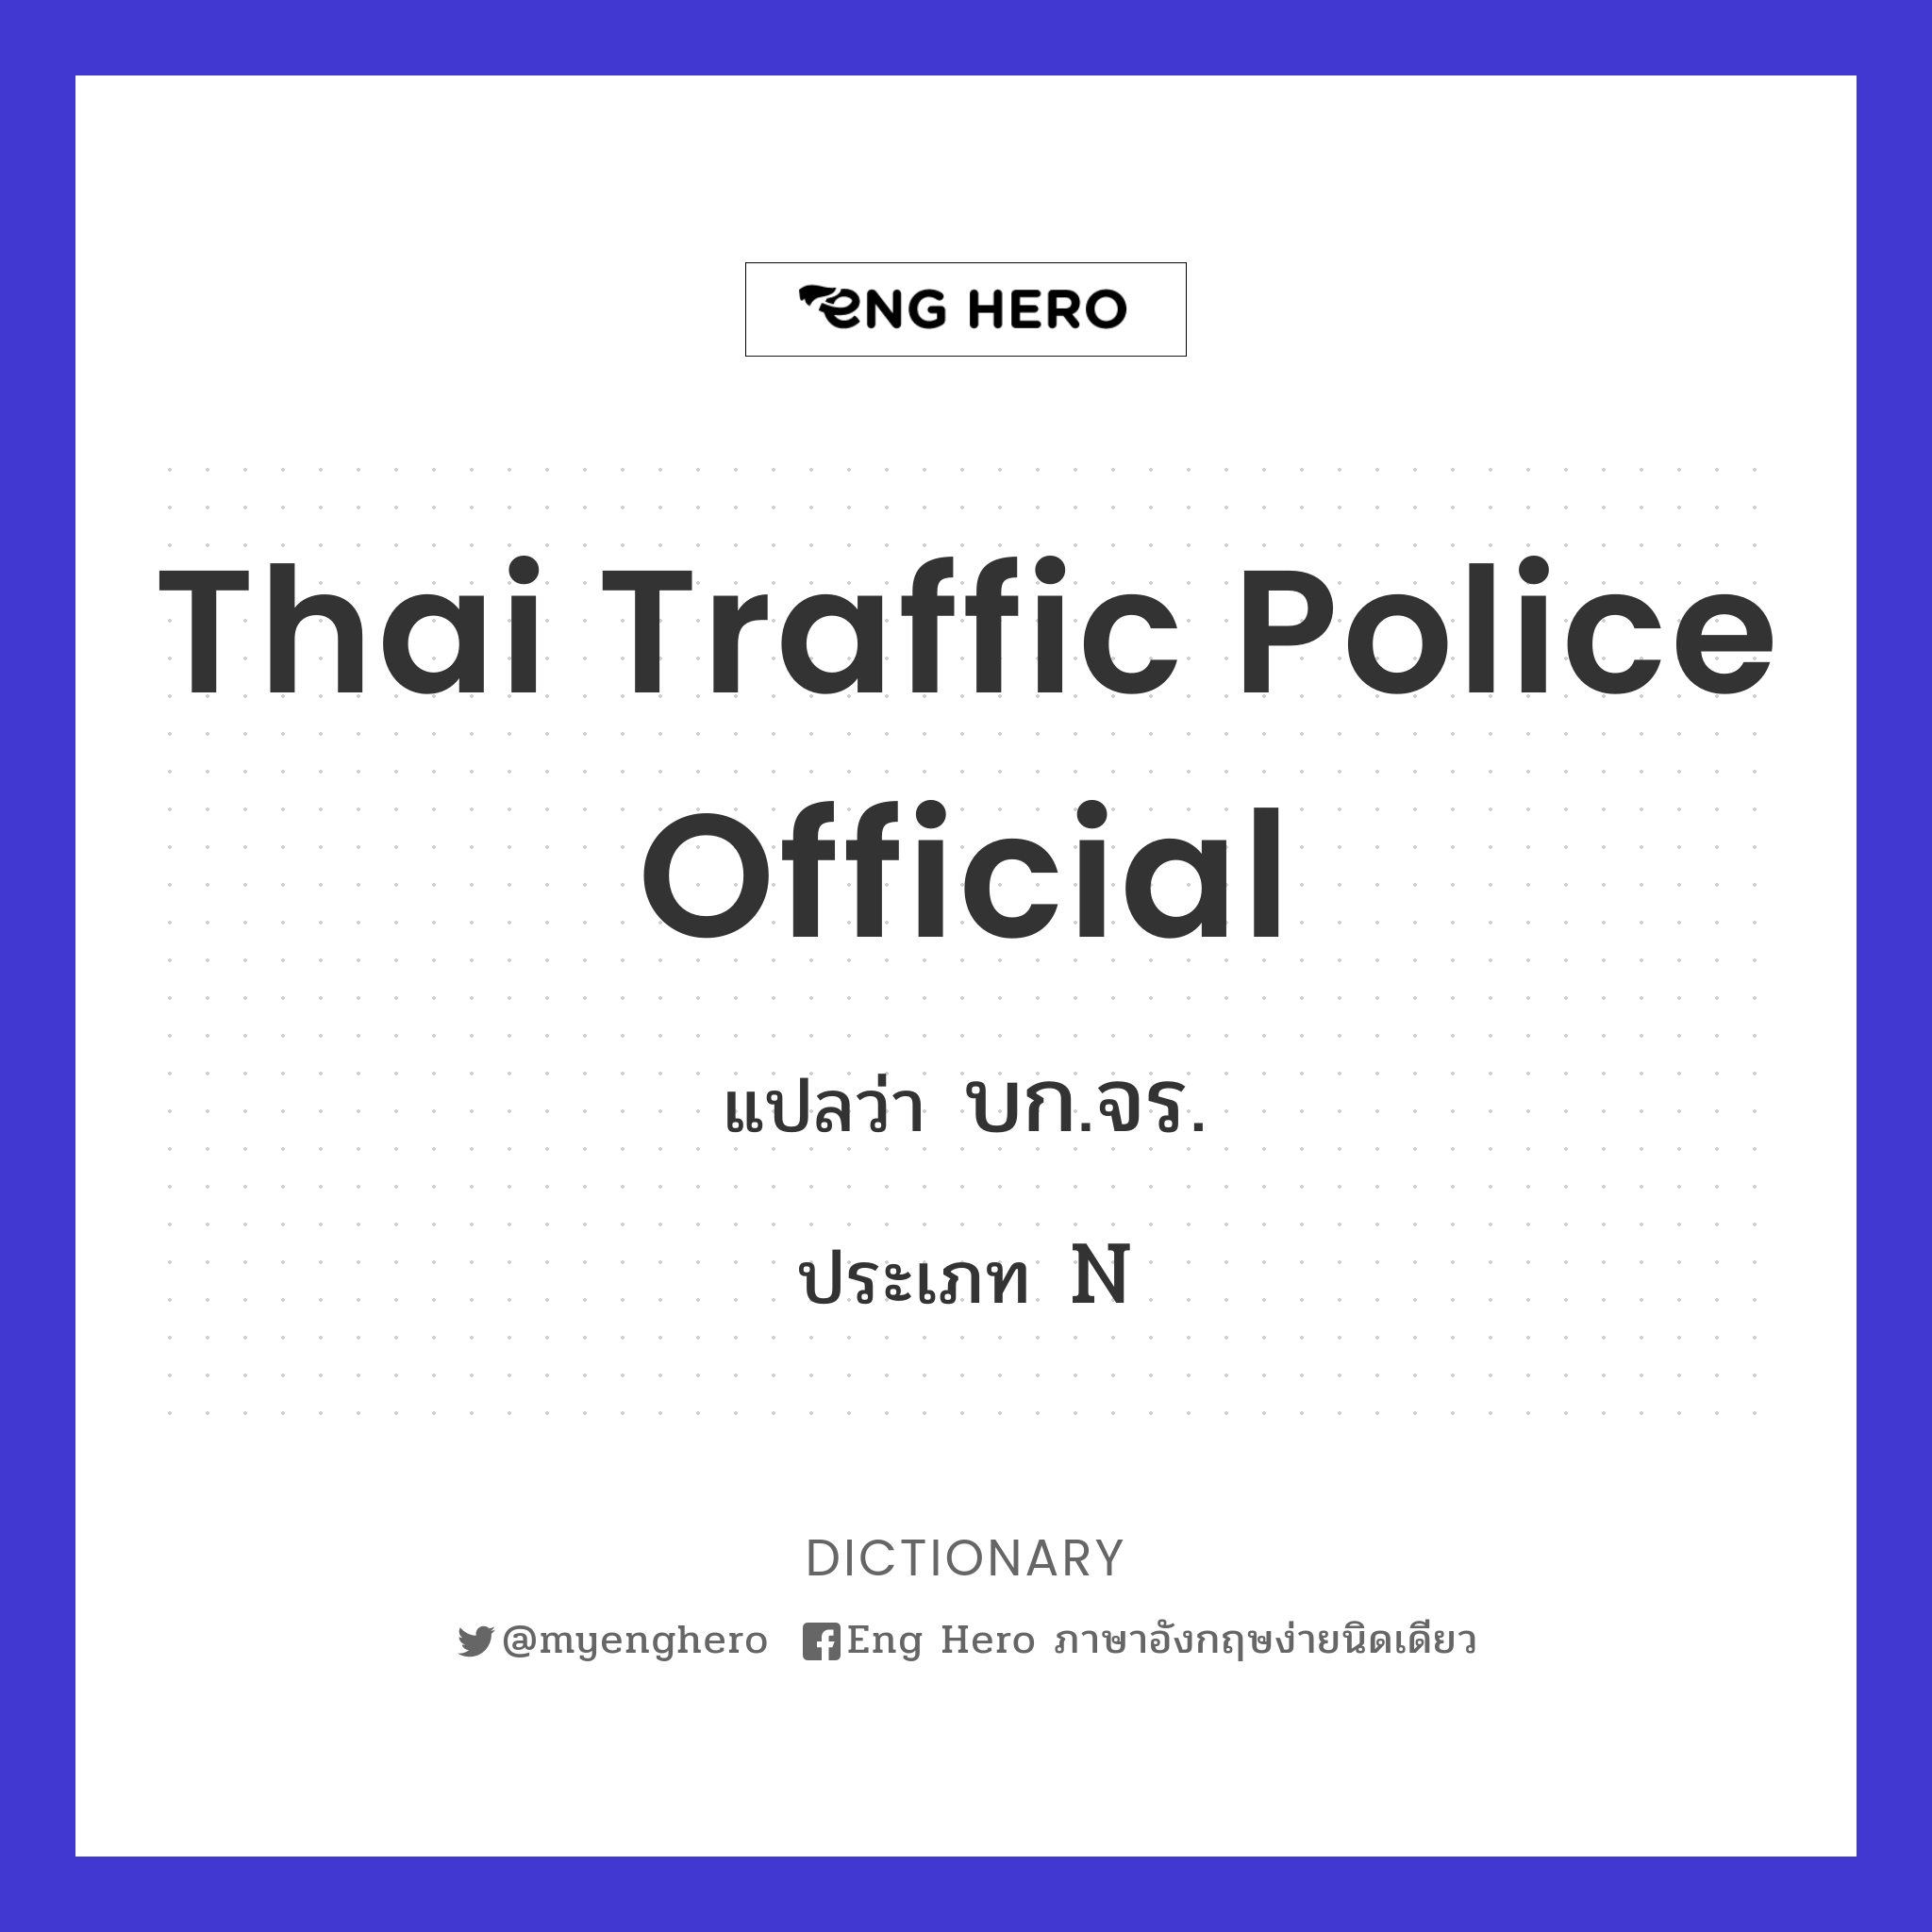 Thai Traffic Police Official